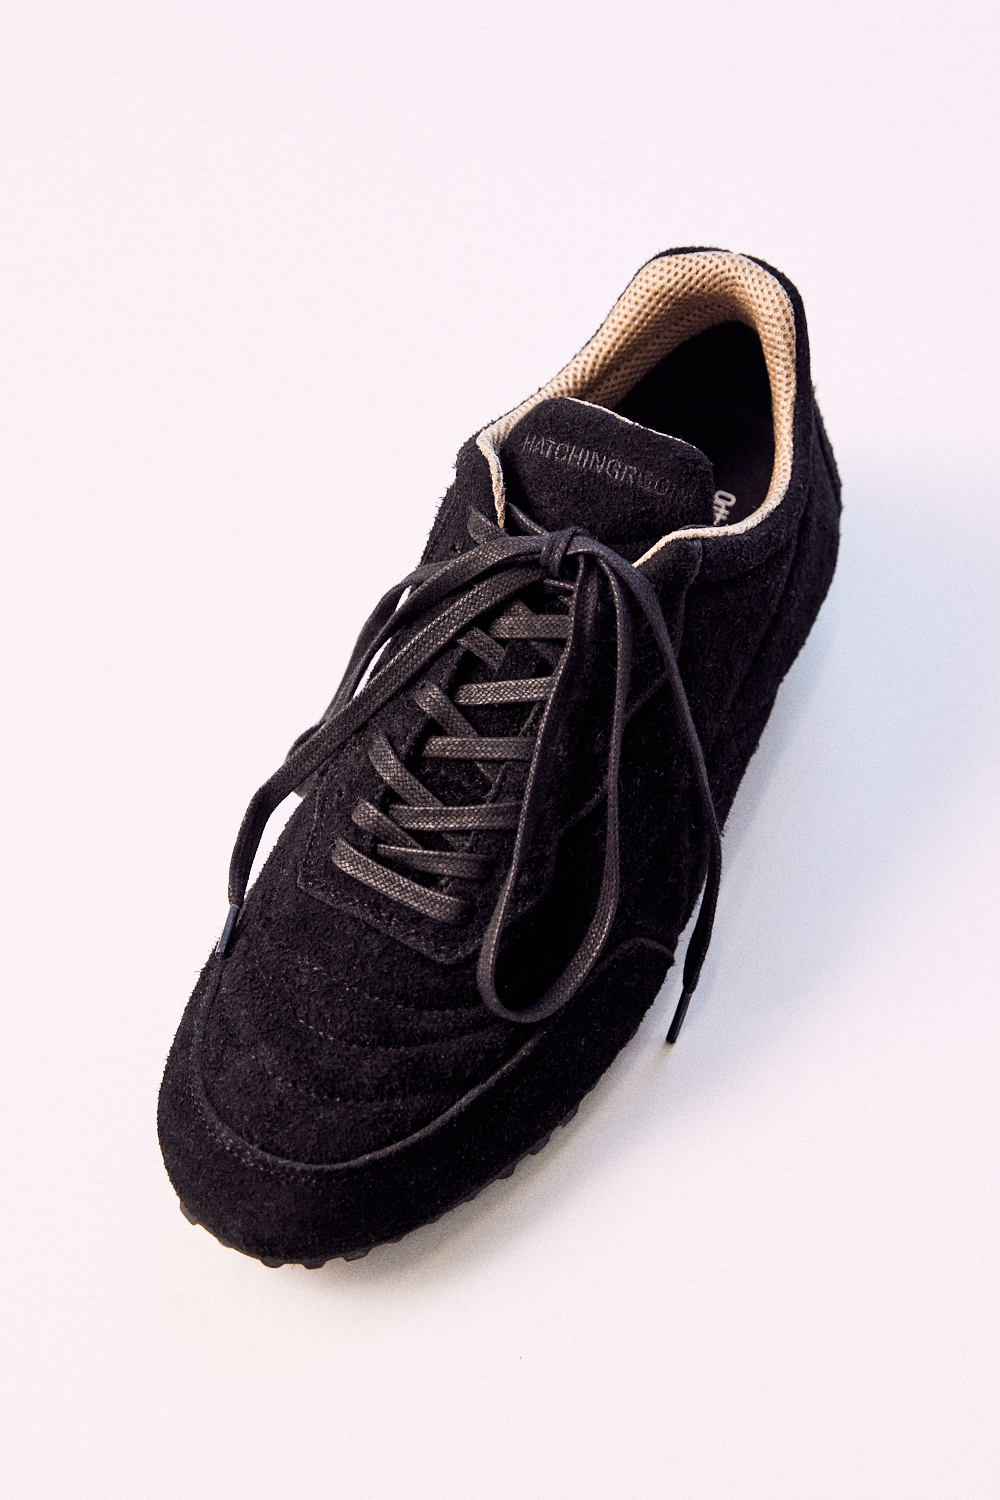 01 Foot Ball Shoes Suede Black